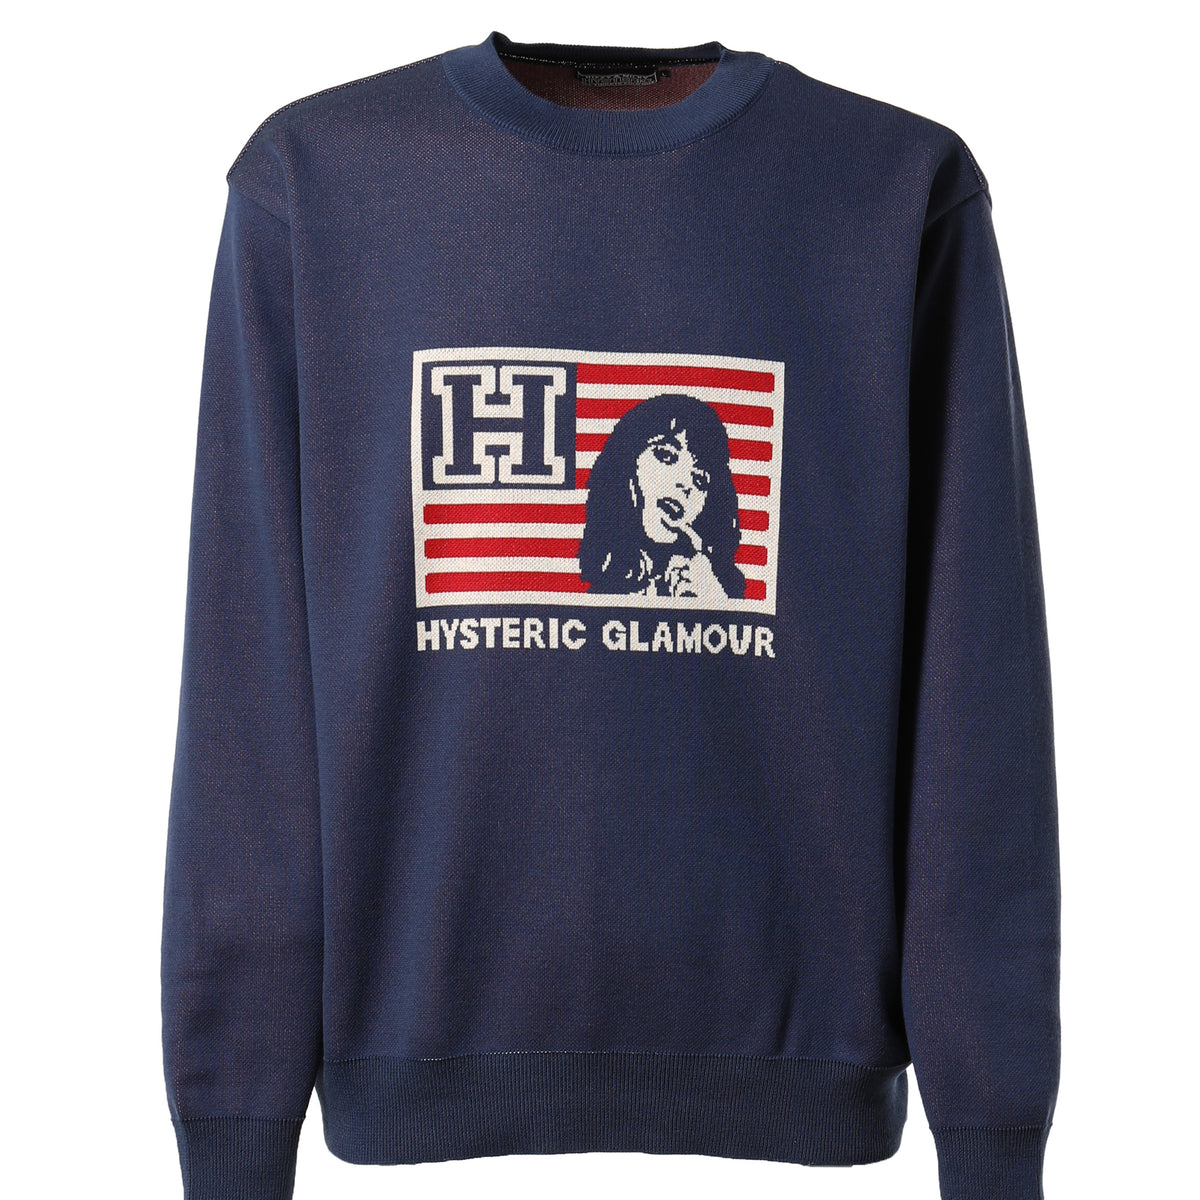 HYSTERIC GLAMOUR FW23 H AND STRIPES JACQUARD SWEATER / NVY -NUBIAN